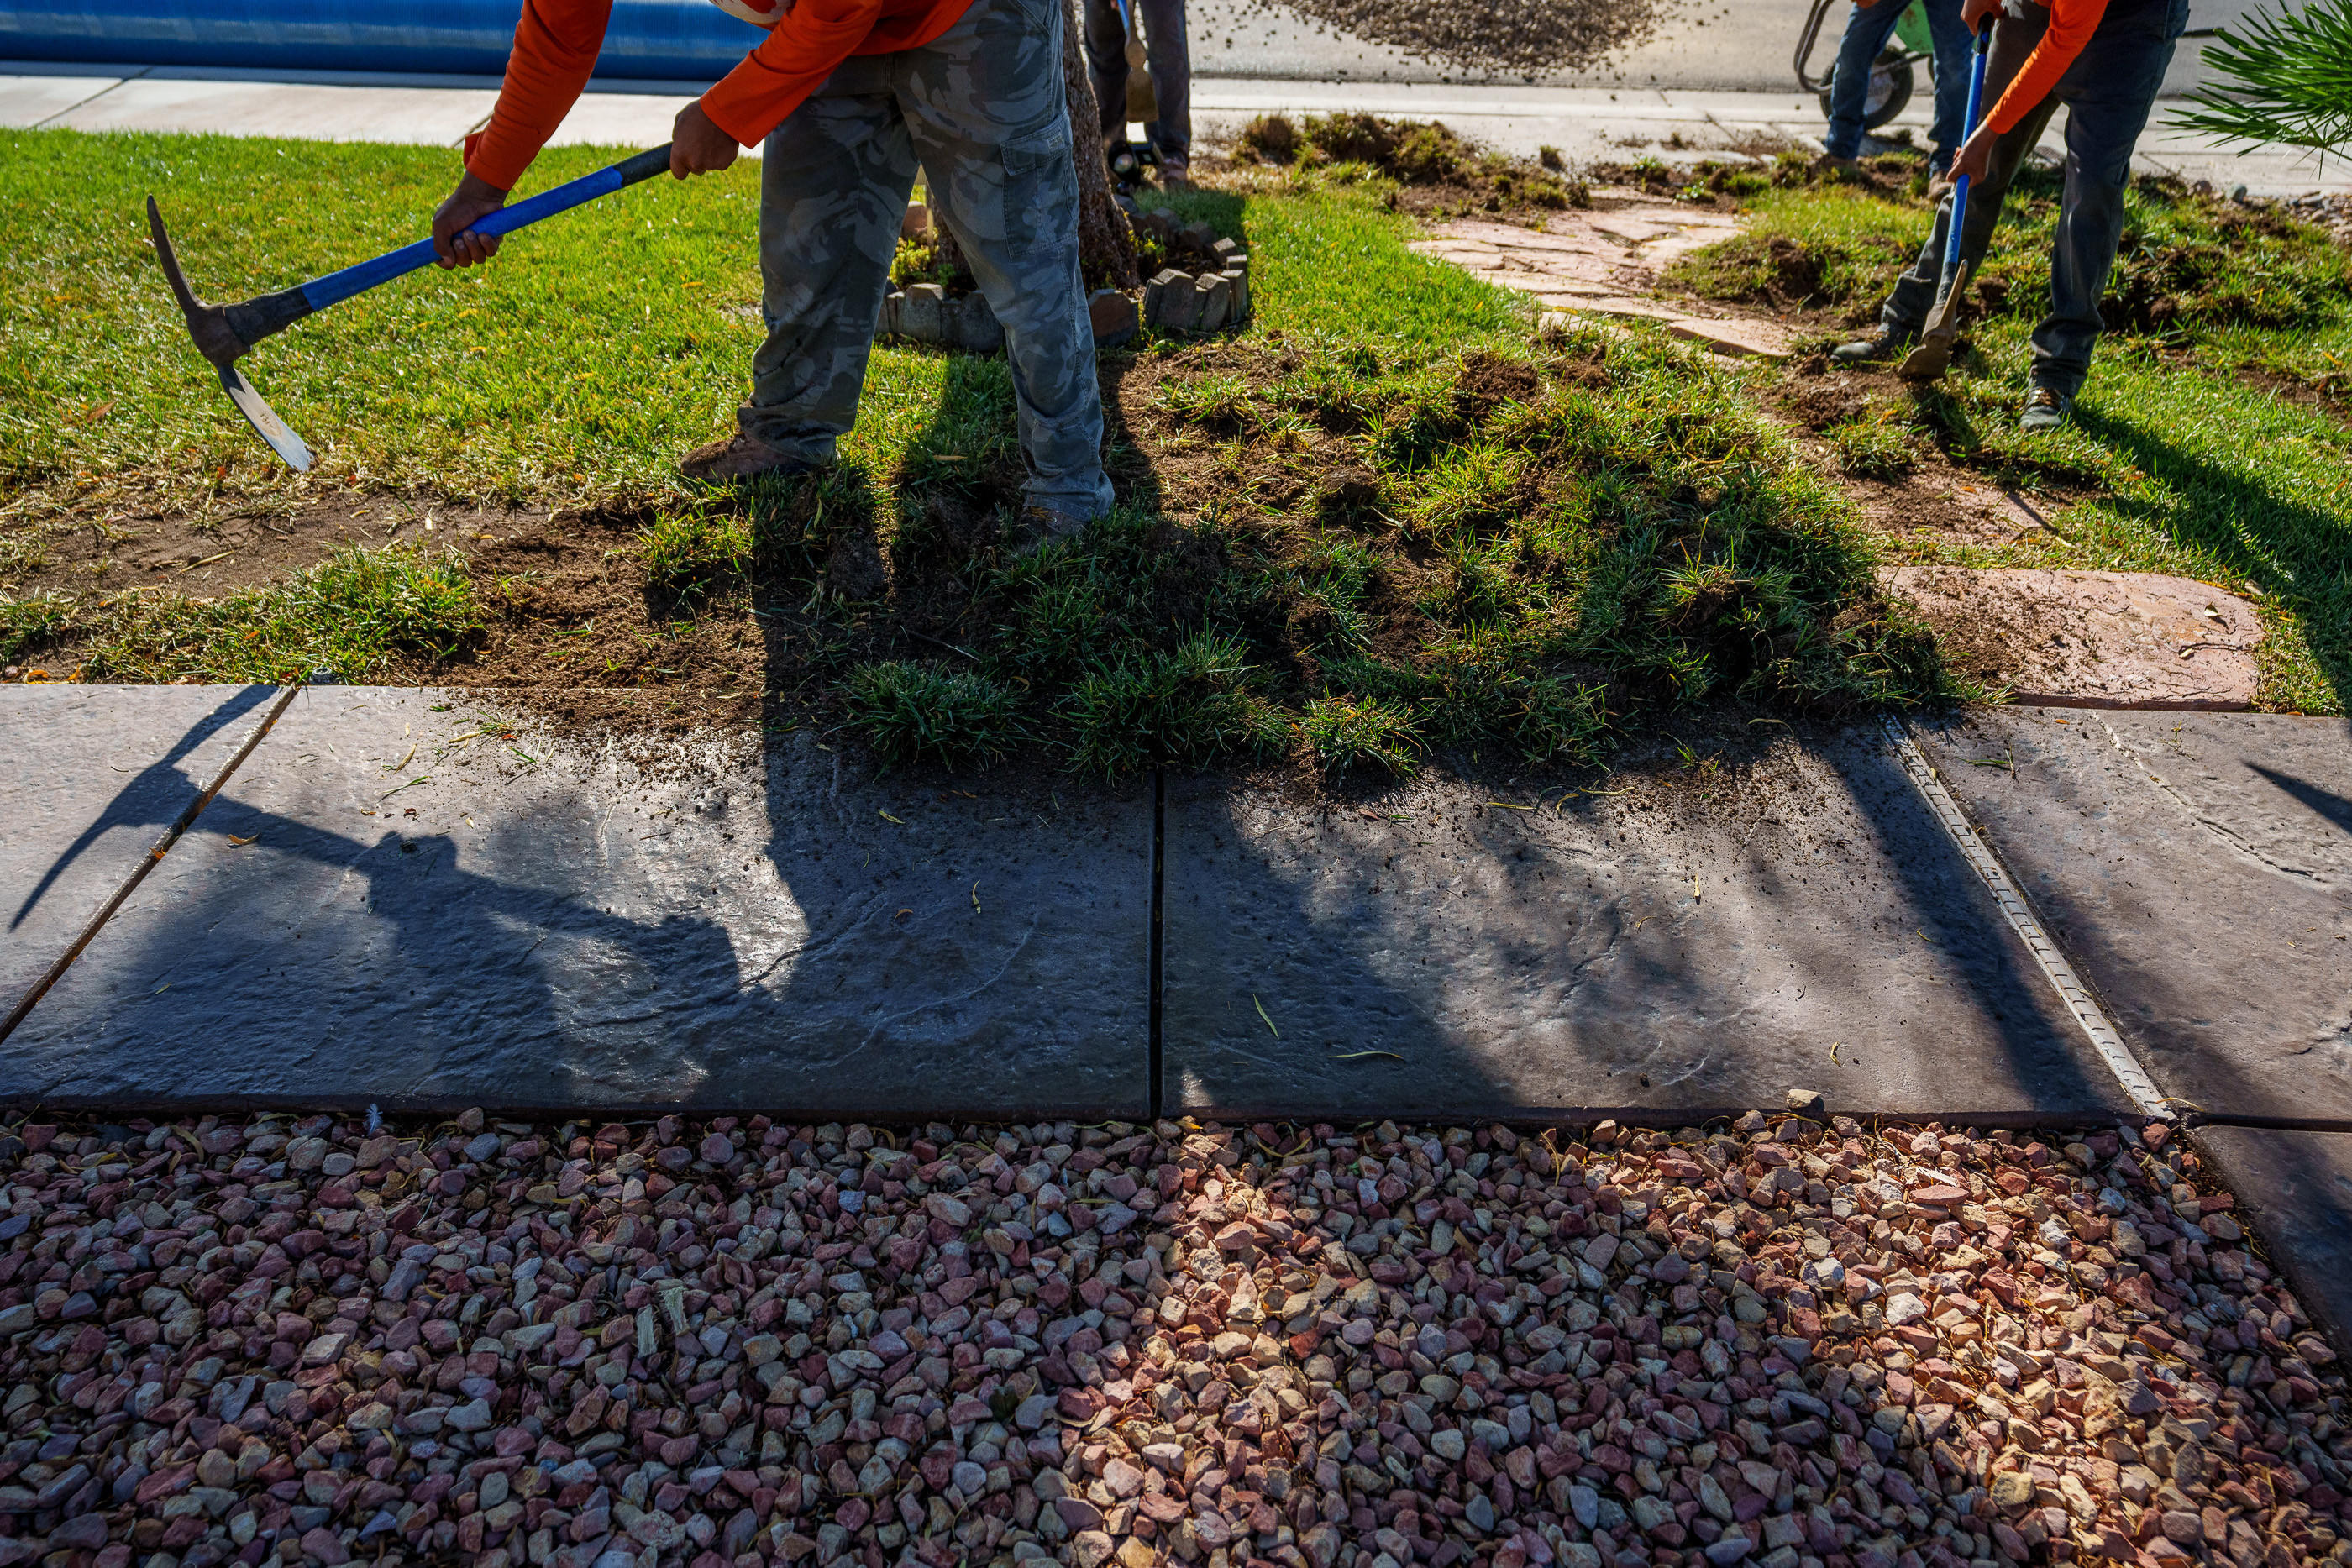 (Trent Nelson  |  The Salt Lake Tribune) Workers with Foxtail Turf remove the grass from Patricia Council's North Las Vegas yard, replacing it with artificial turf on Thursday, Sept. 29, 2022.